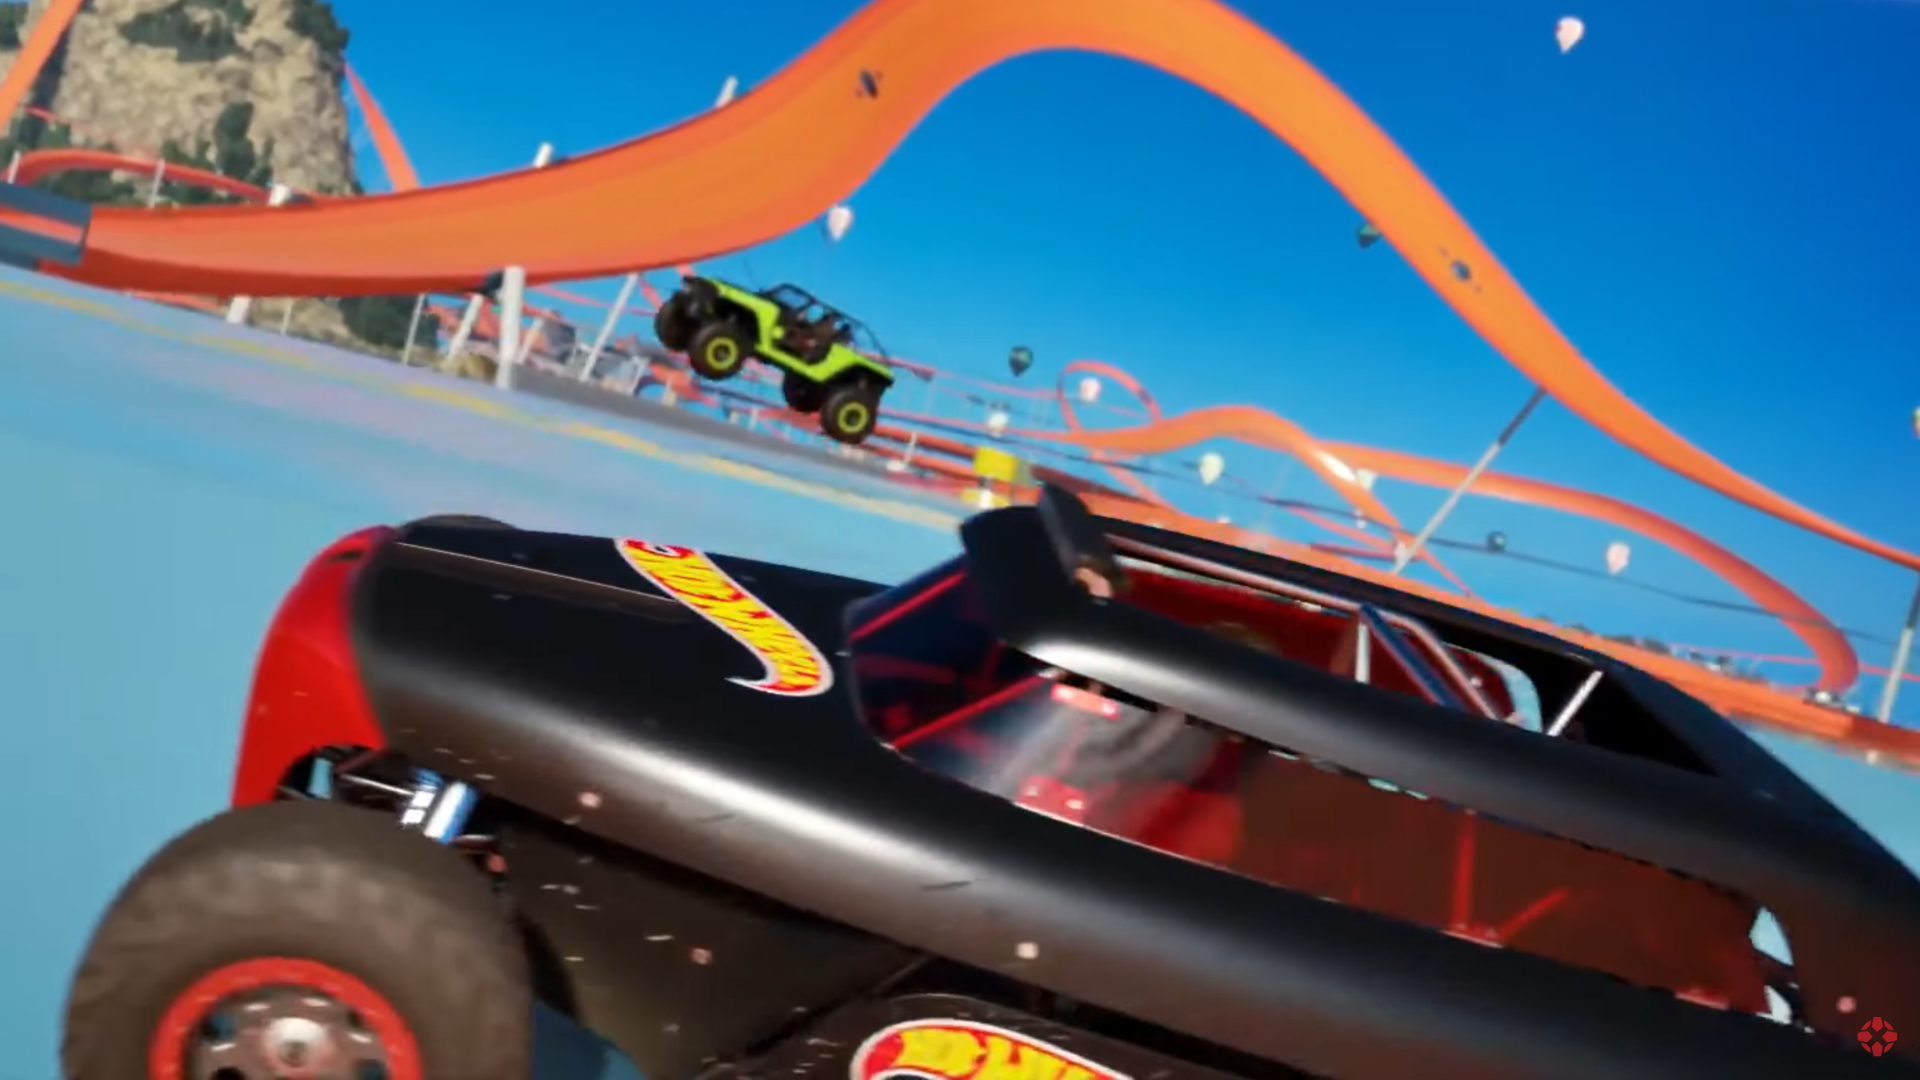 Forza Horizon 5 Hot Wheels Expansion Leaked by Steam